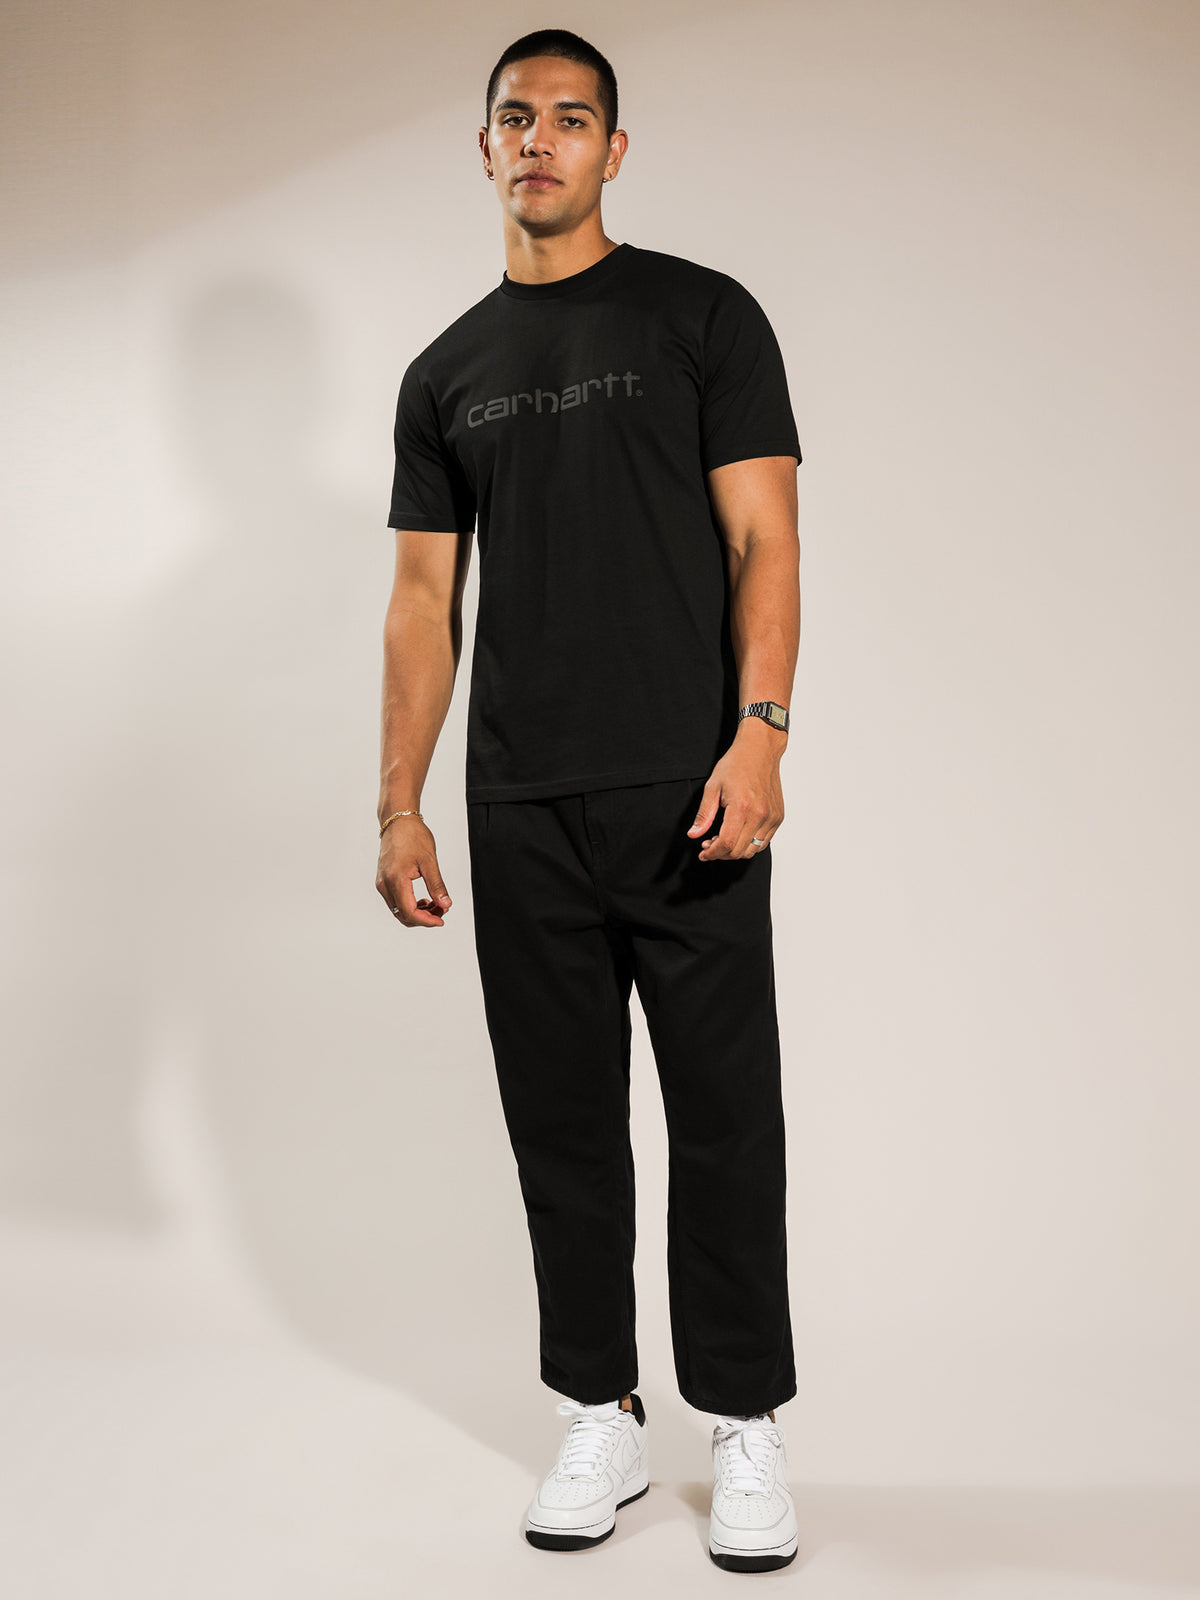 Capital Knitted Short Sleeve Polo in Black